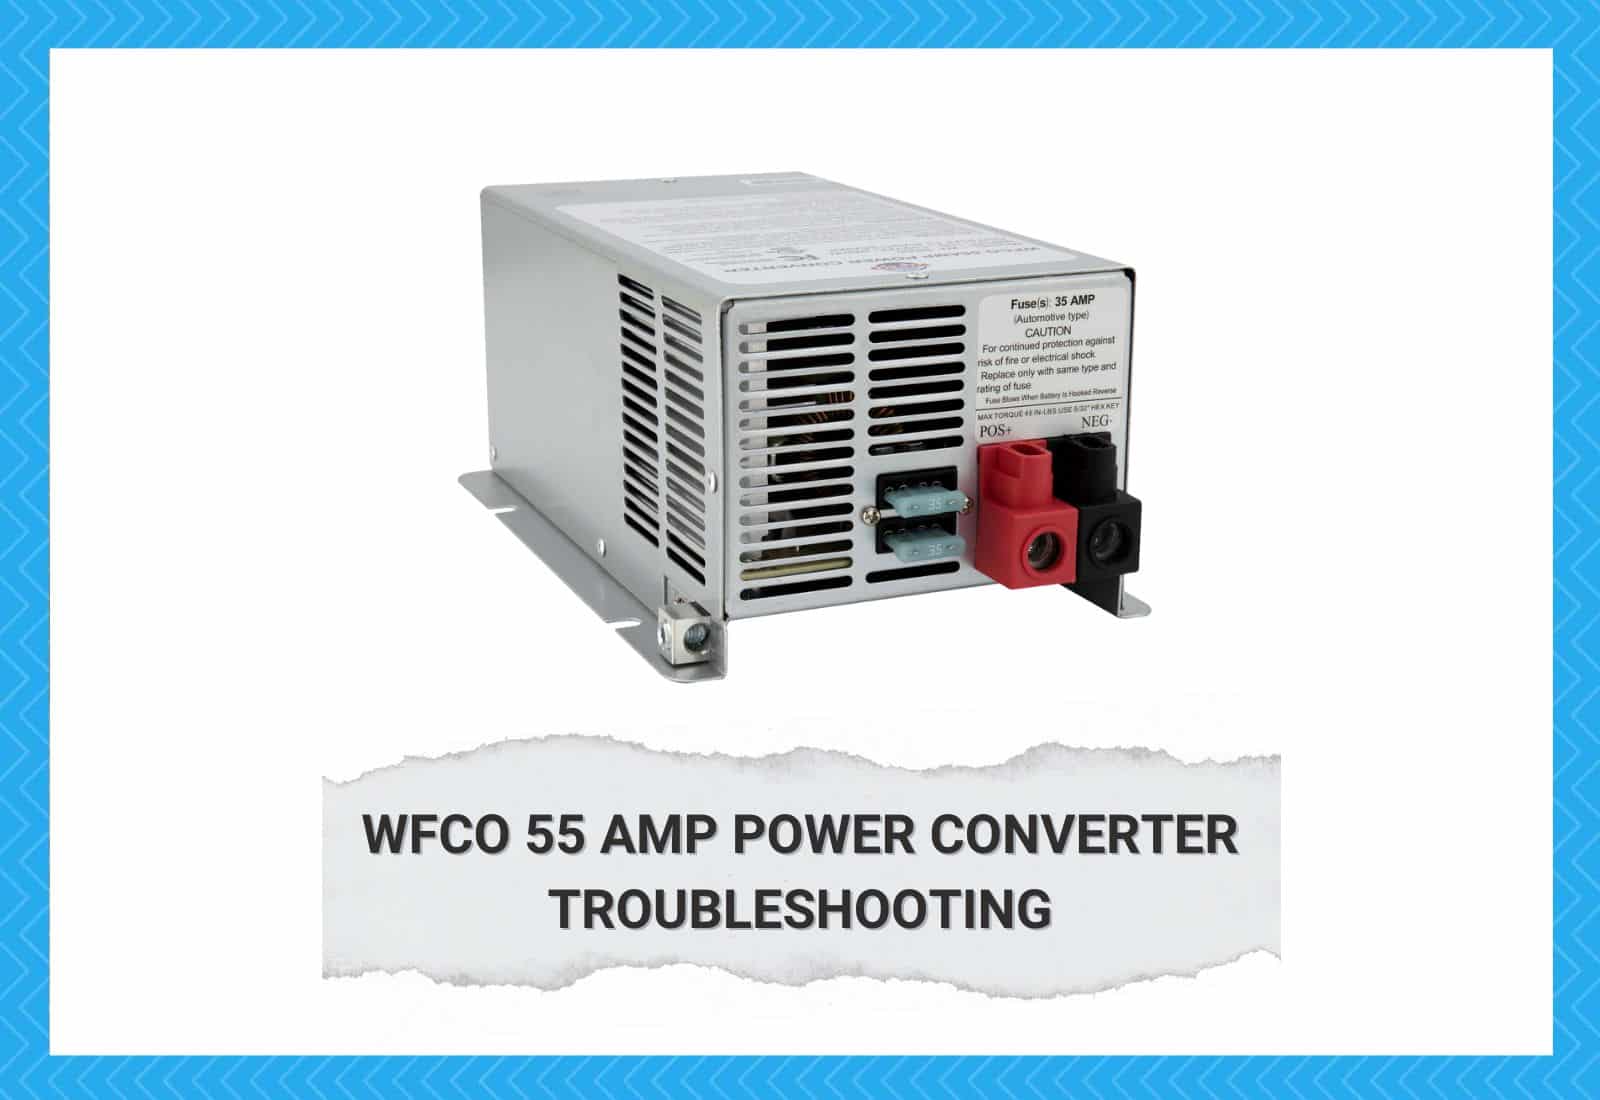 WFCO 55 AMP Power Converter Troubleshooting